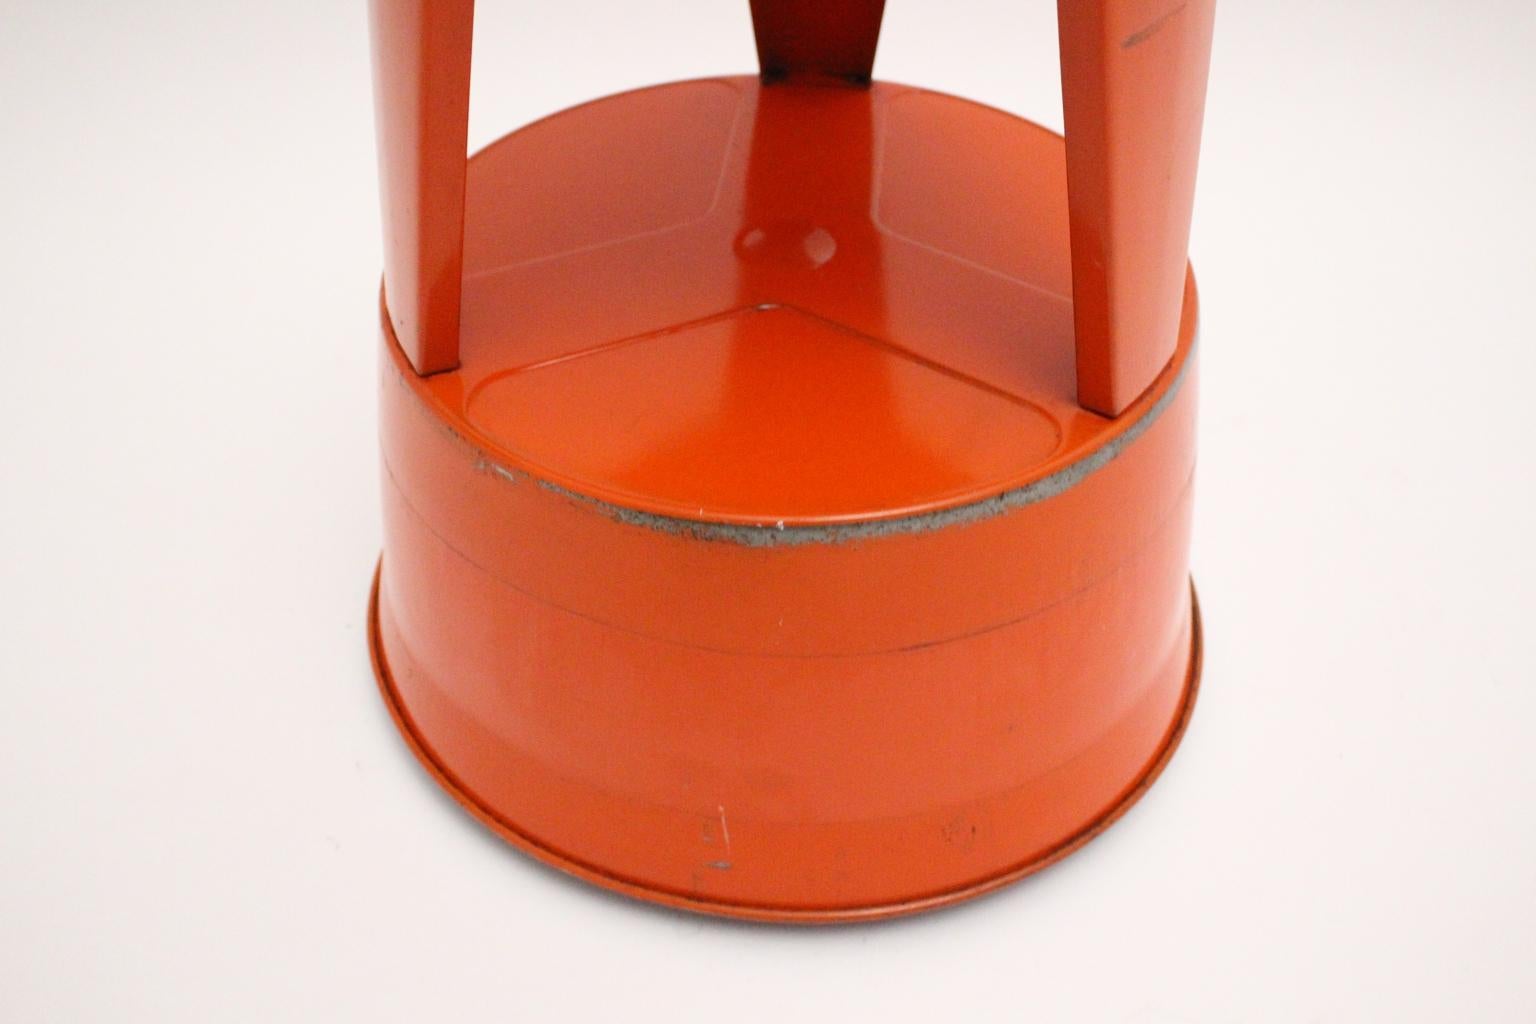 French Vintage Red Metal Kik Step Stool by Marc Adnet, Blanc, Mesnil, France, 1970s For Sale